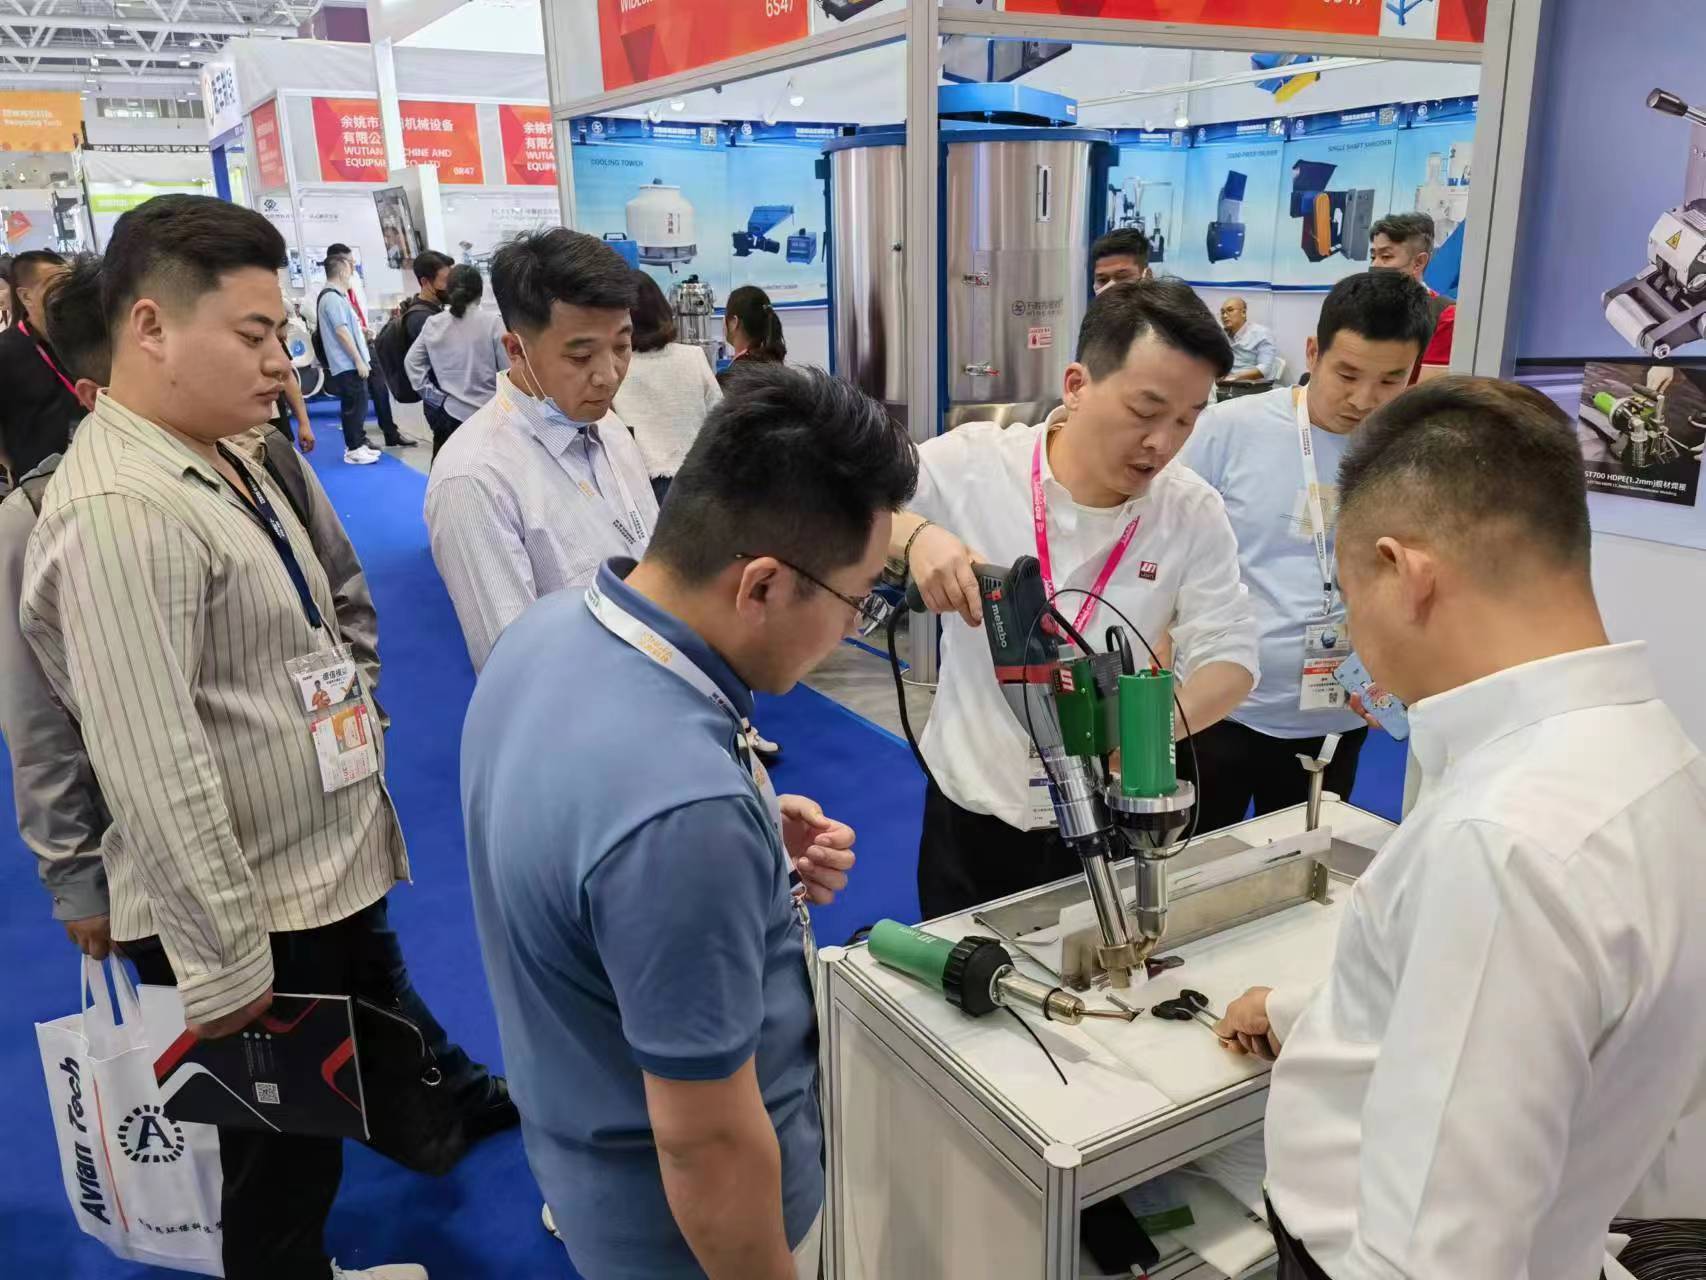 2023 International Rubber and Plastic Exhibition | Lesite showcases numerous highlights and catches the eye